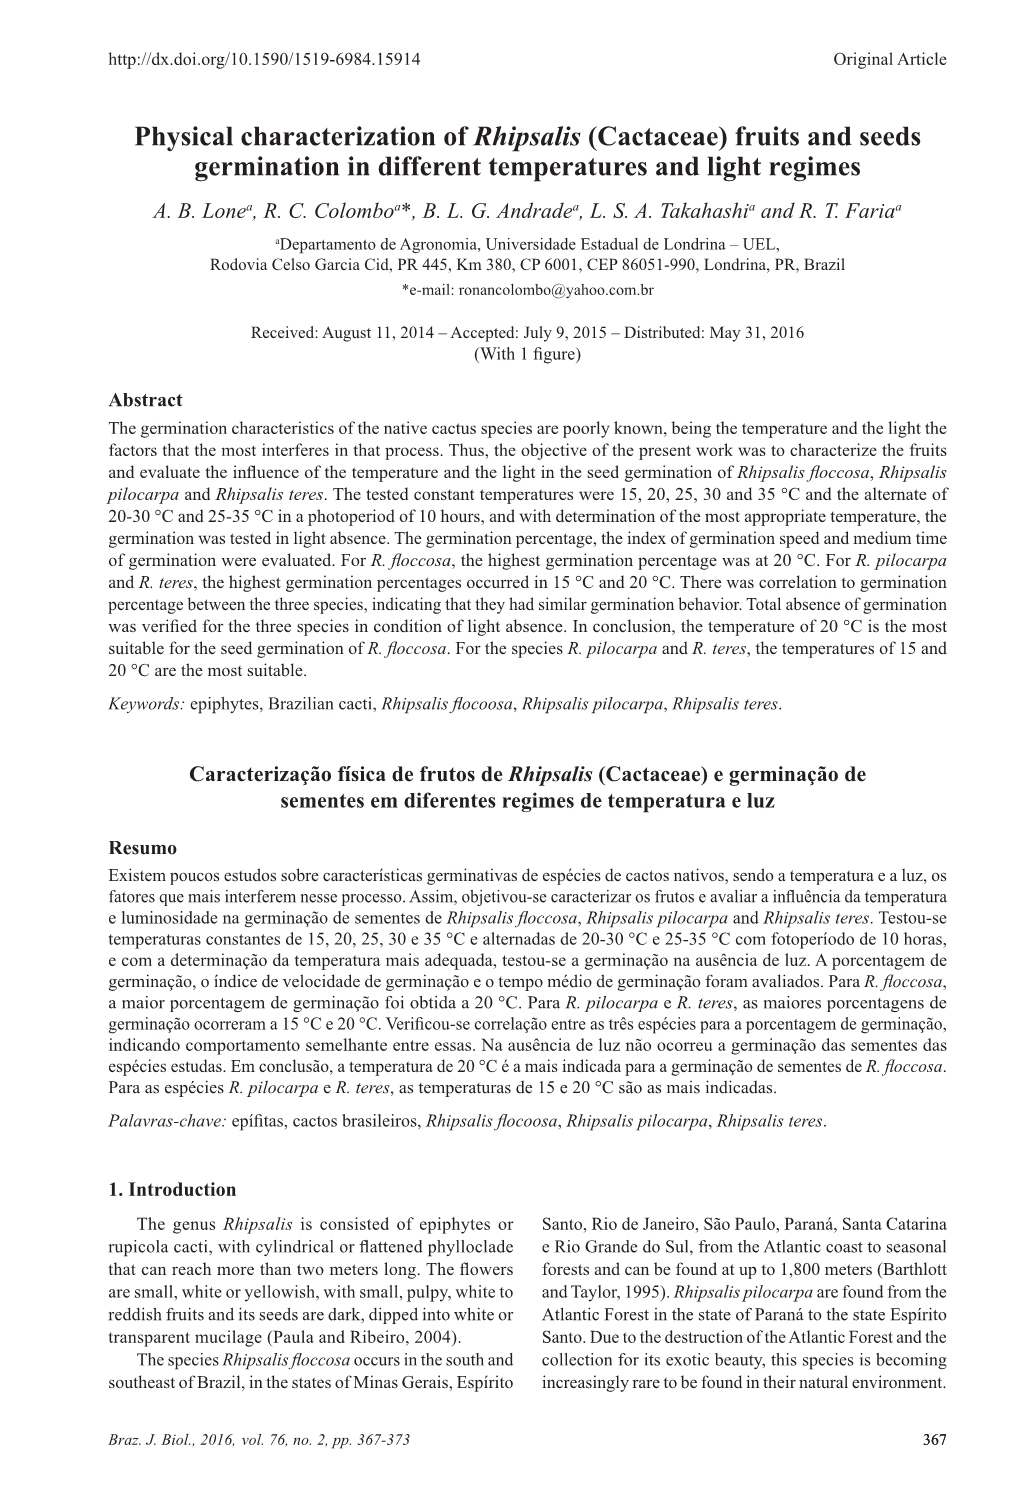 Physical Characterization of Rhipsalis (Cactaceae) Fruits and Seeds Germination in Different Temperatures and Light Regimes A